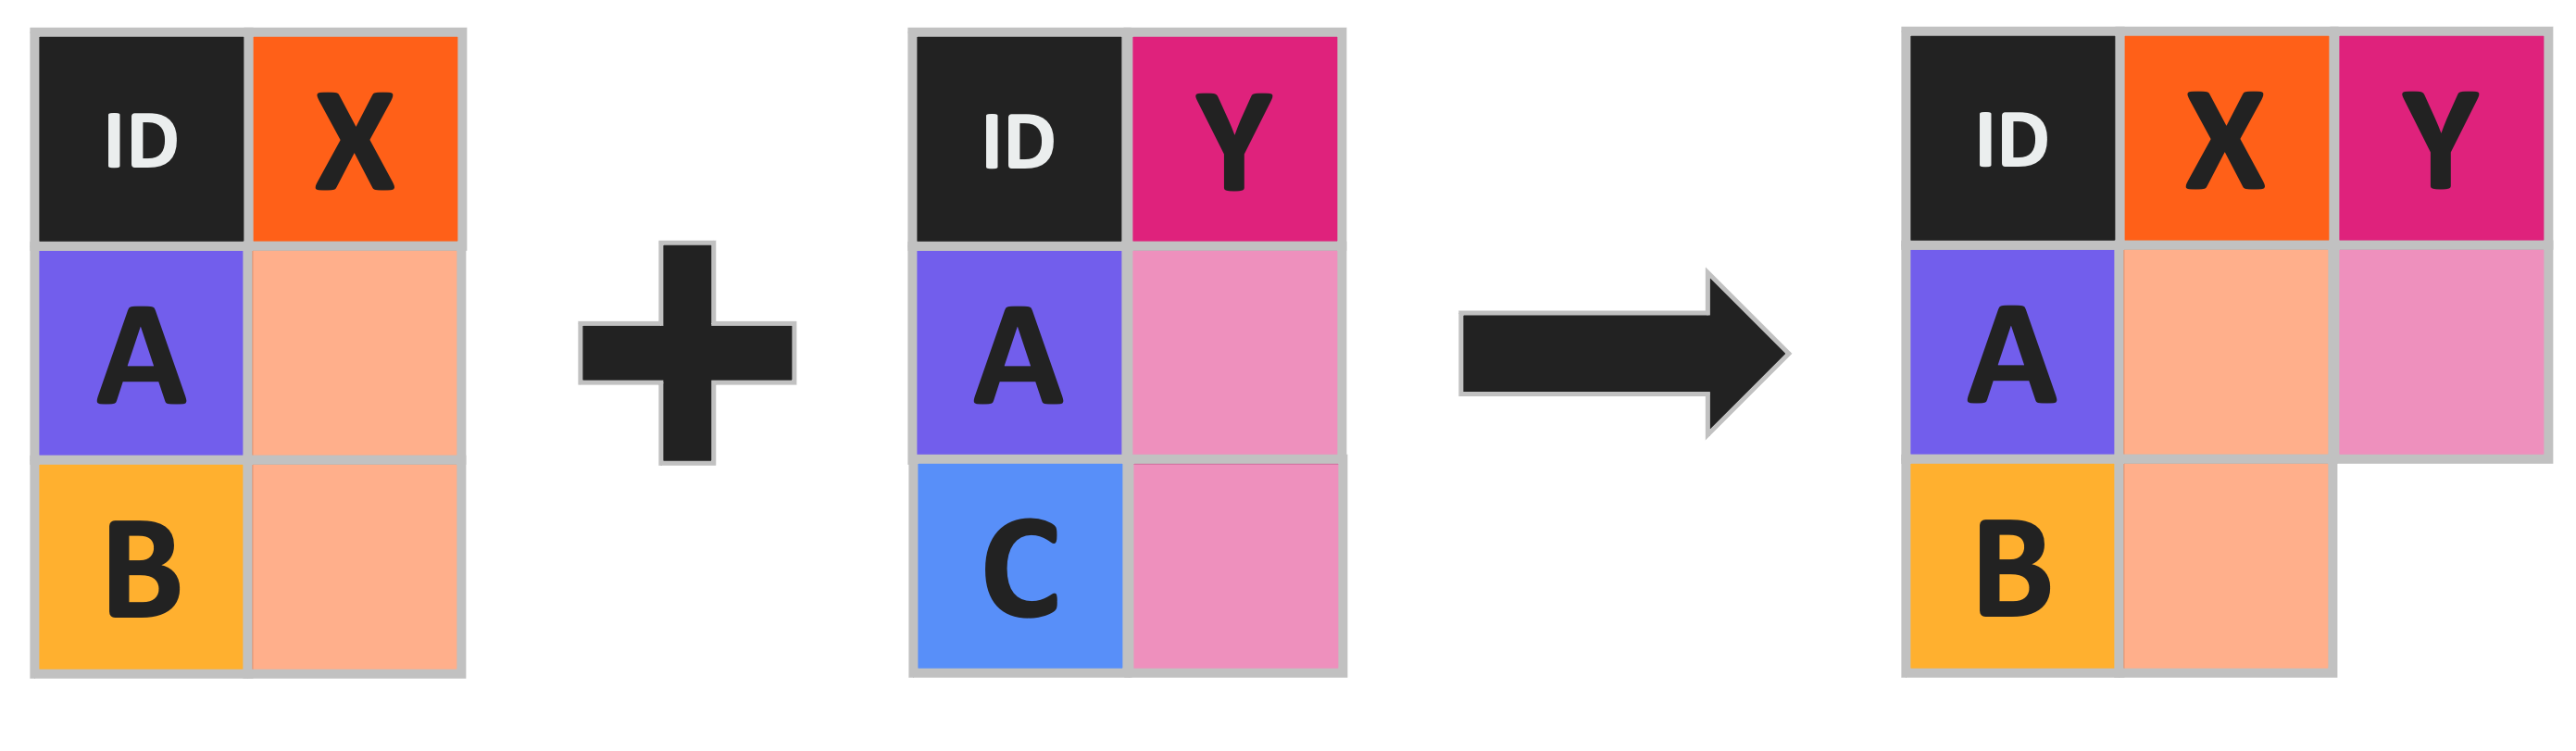 Table with an 'X' column and 'A' and 'B' rows gets joined with a second table with a 'Y' column and 'A' and 'C' rows to produce a single table with 'X' and Y' columns and 'A' and 'B' rows